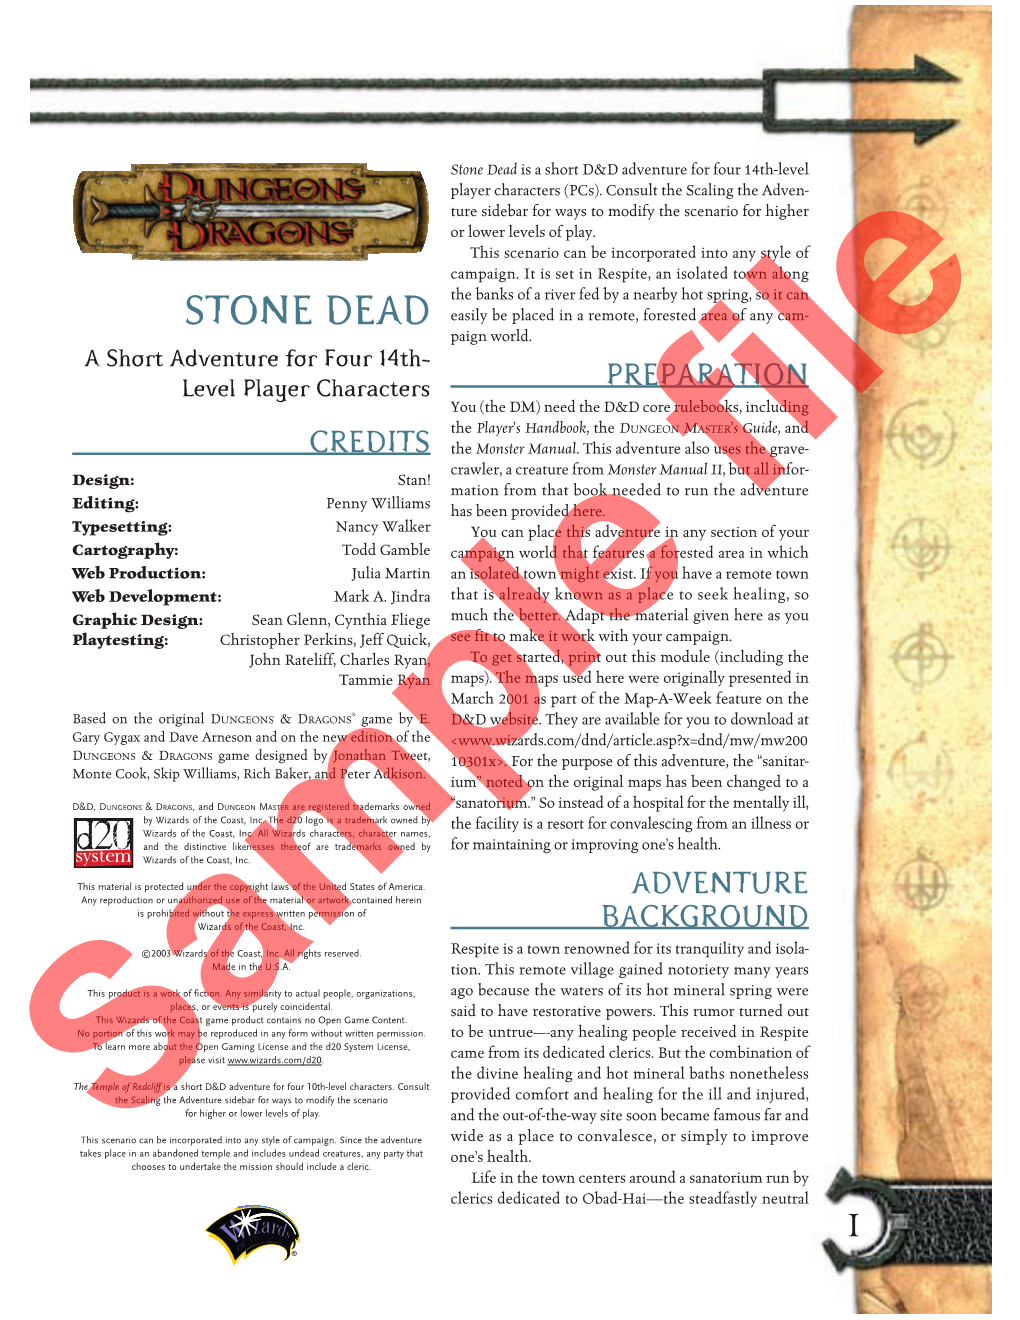 Stone Dead Is a Short D&D Adventure for Four 14Th-Level Player Characters (Pcs)